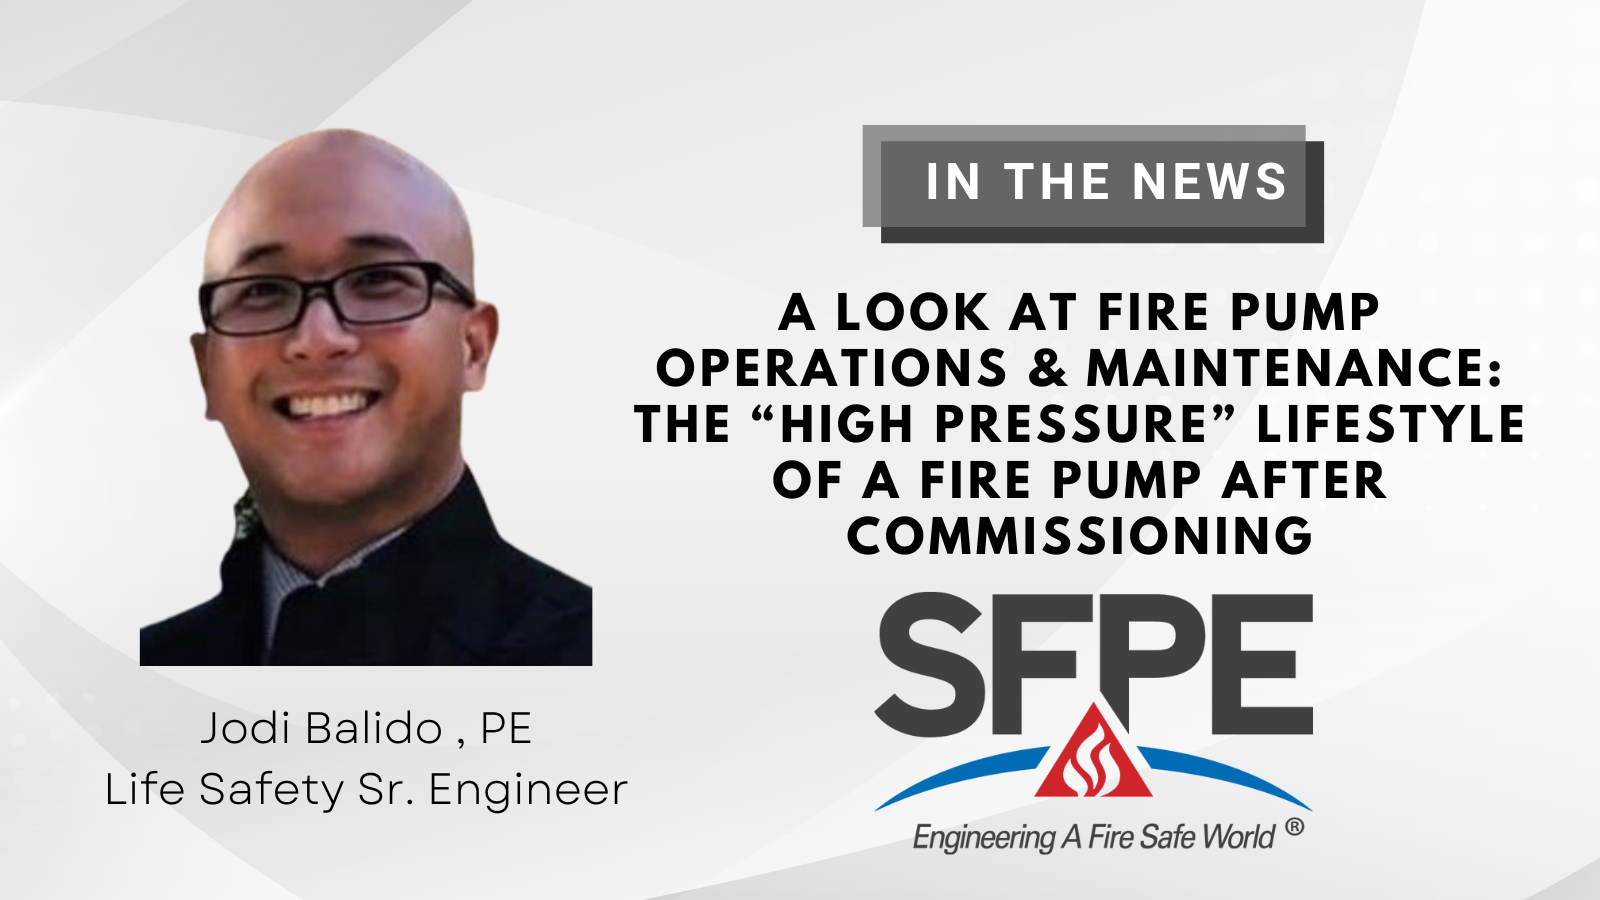 In the News: A Look at Fire Pump Operations & Maintenance: The “High Pressure” Lifestyle of a Fire Pump after Commissioning